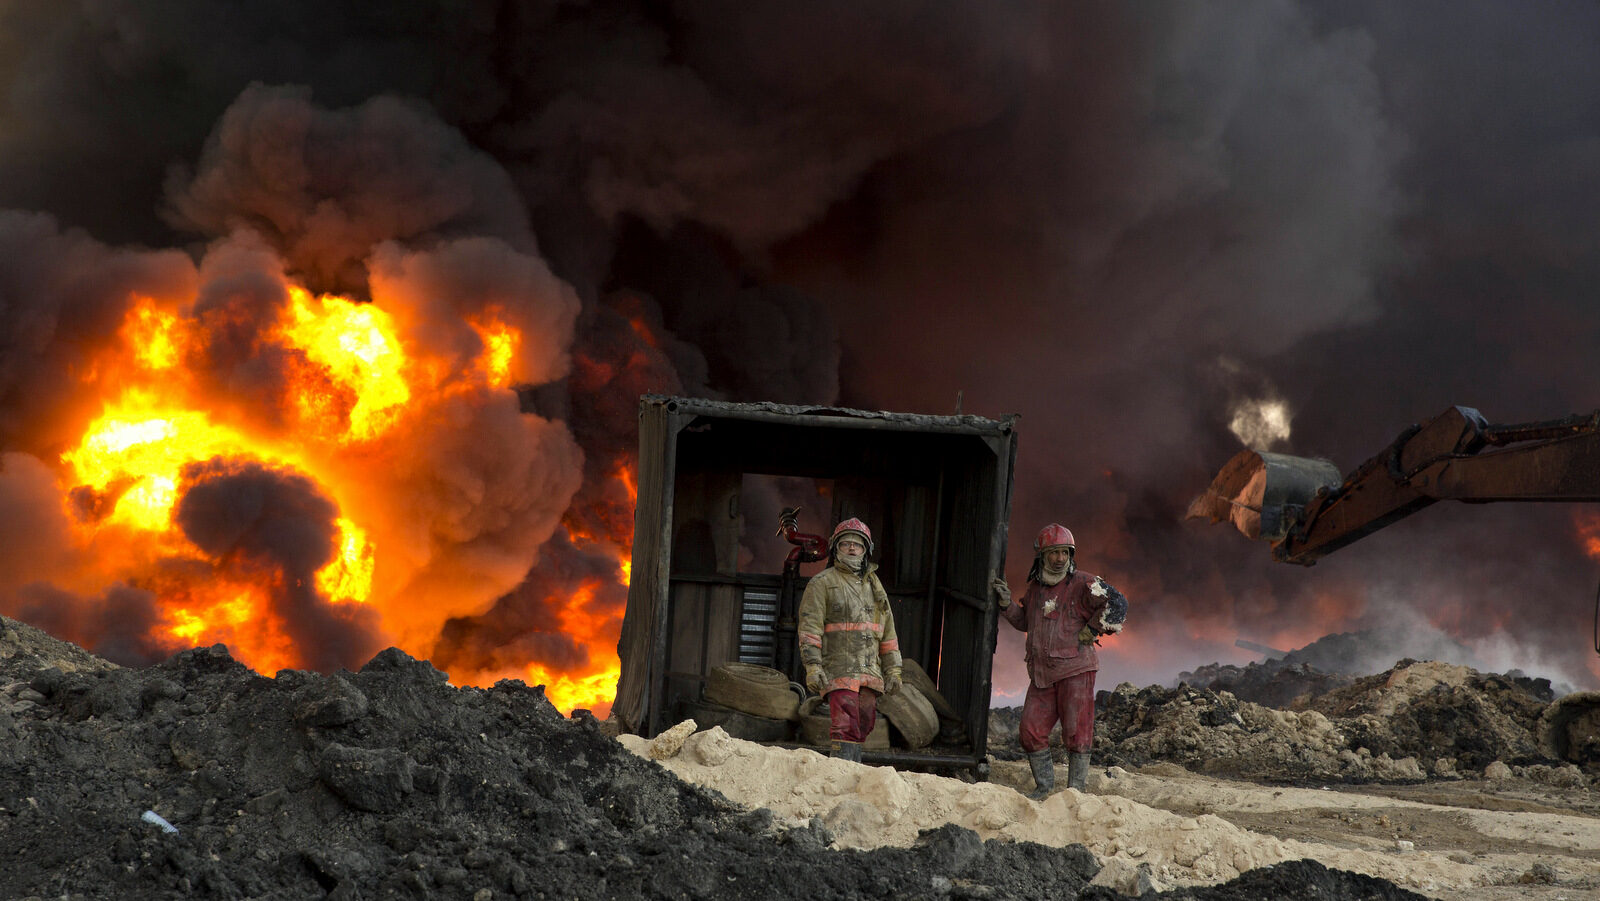 Iraqi fire fighters work to quell a dangerous oil fire set by ISIS militants in Qayara, south of Mosul, Iraq, Monday, Nov. 28, 2016. (AP Photo/Maya Alleruzzo)